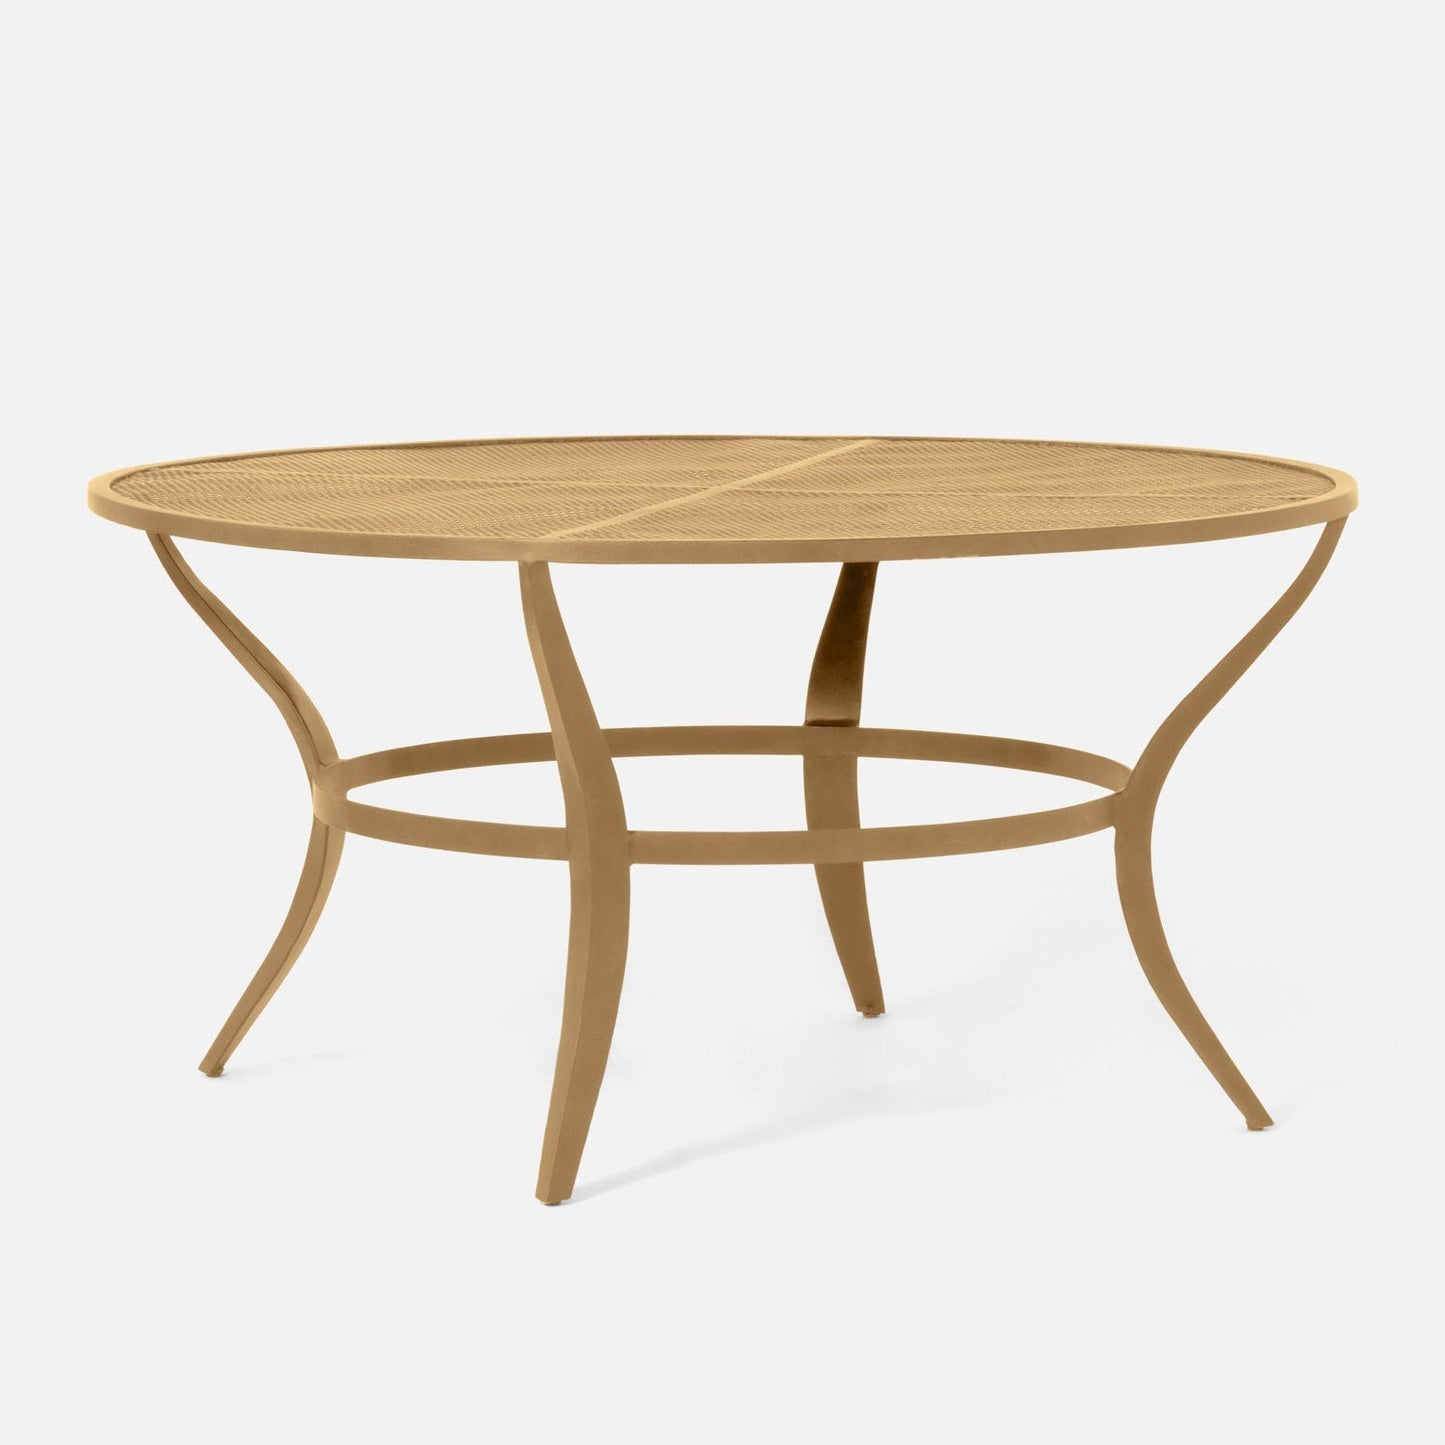 Made Goods Hadley 60" x 30" Gold Mesh Metal Dinning Table With Round Table Top